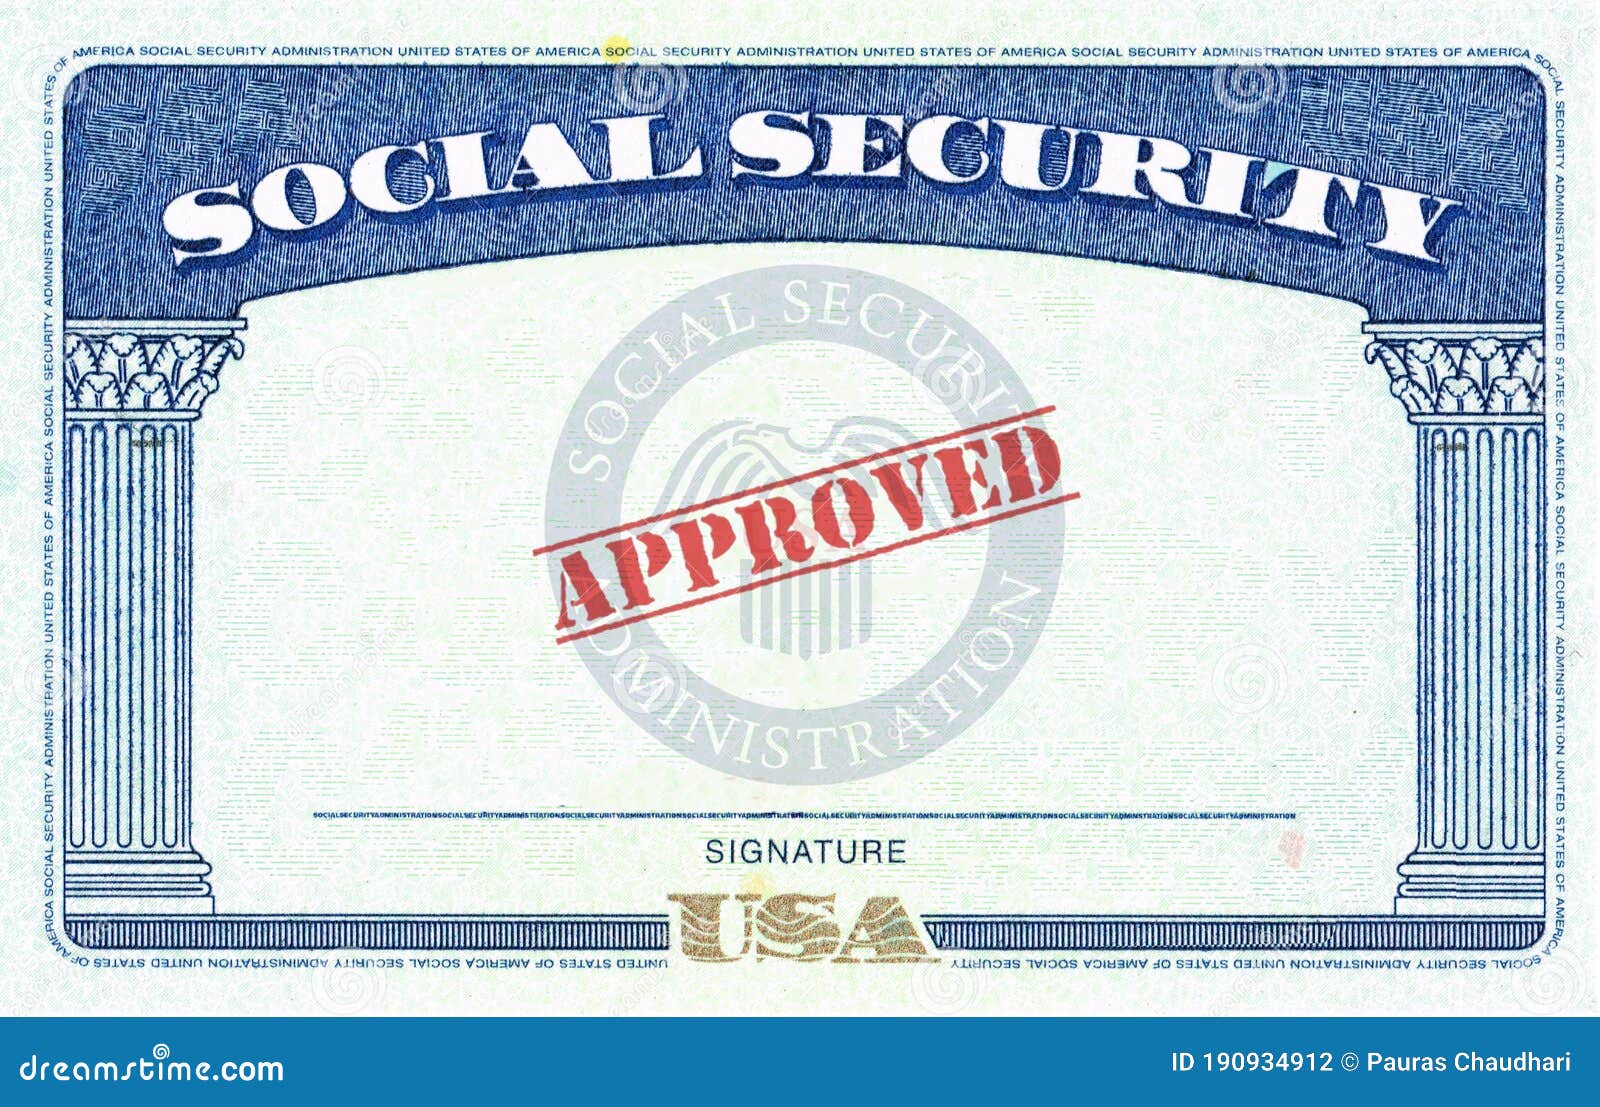 Social Security Card Template Photos - Free & Royalty-Free Stock For Ssn Card Template